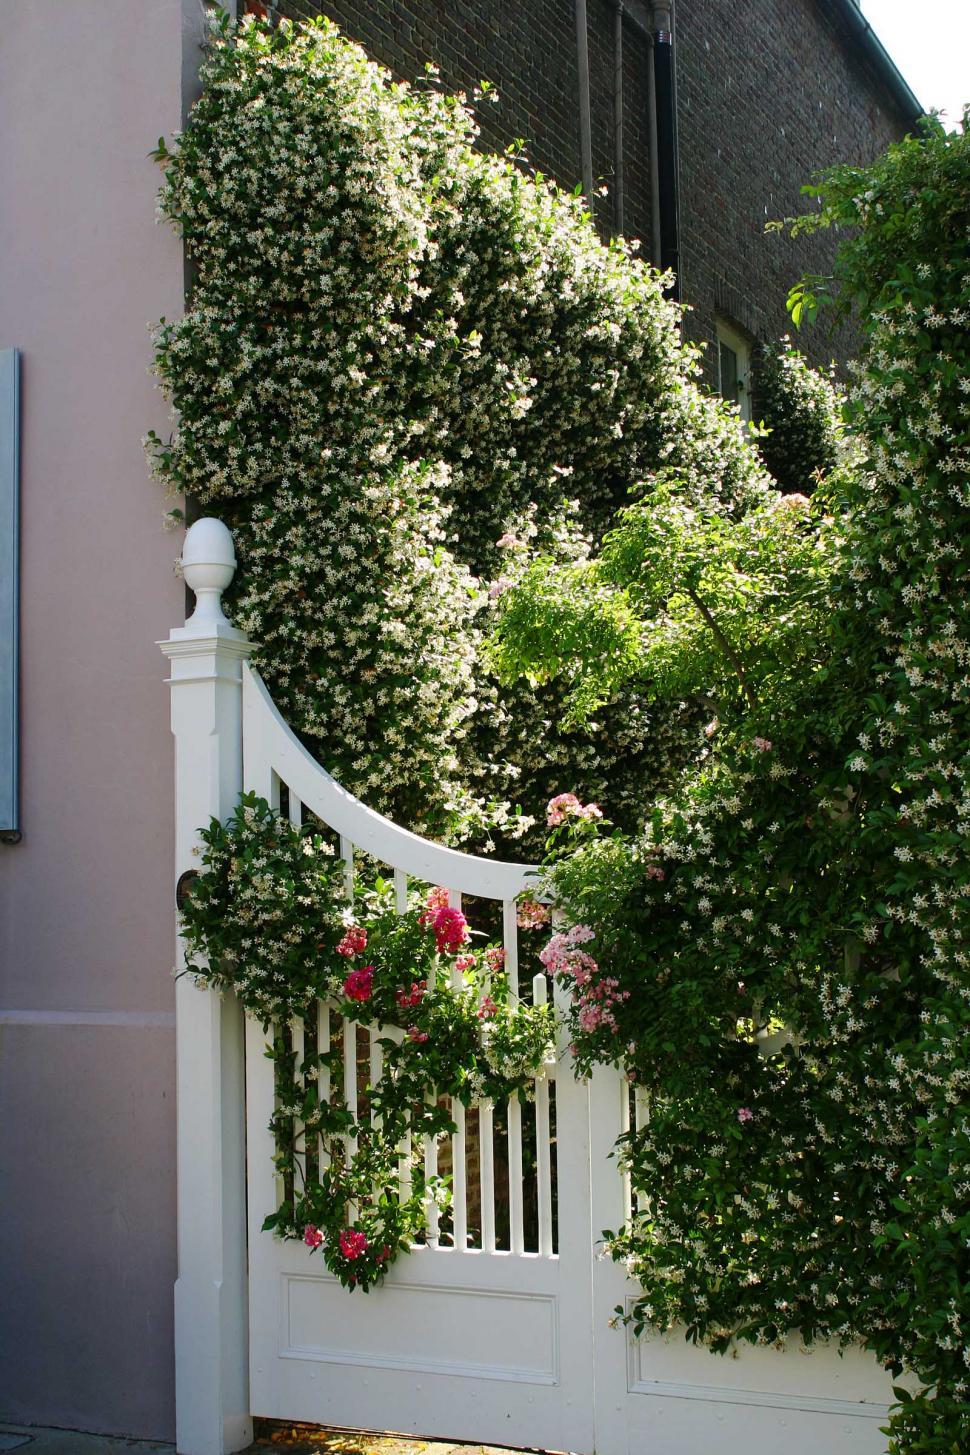 Free Image of vines and gate 